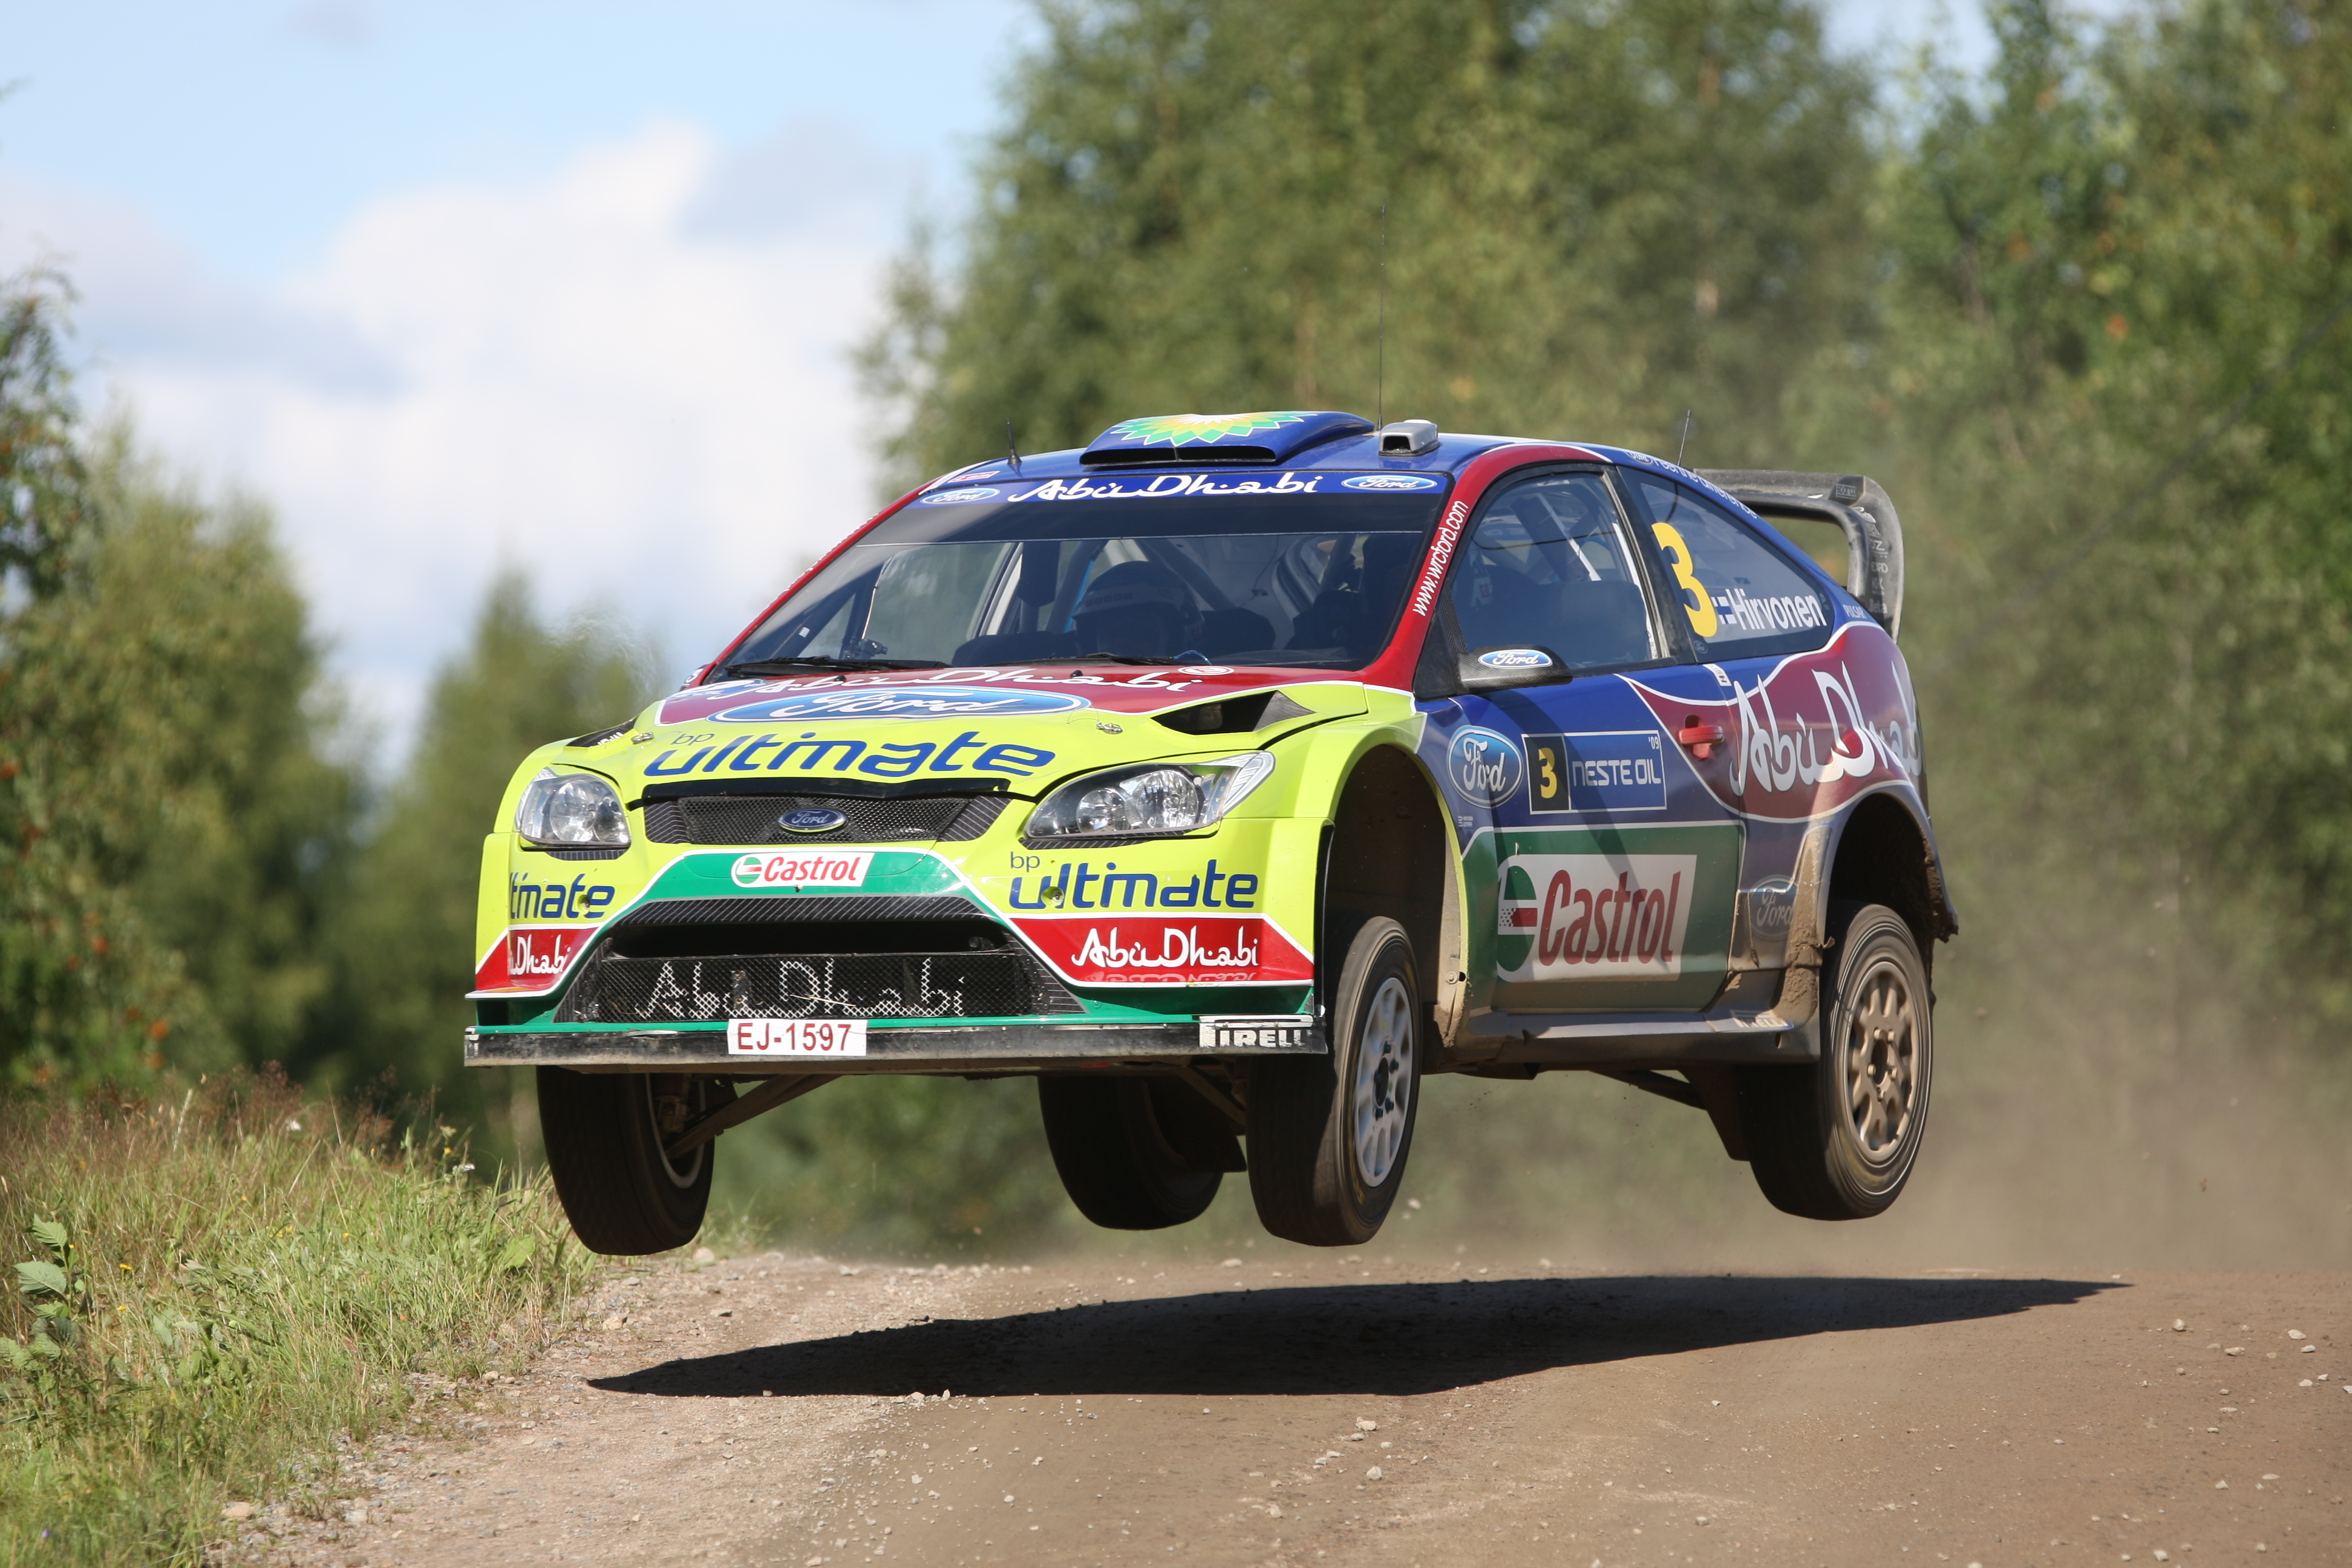 Ралли сайт. Ford Focus RS Rally 2007. Форд фокус 3 ралли. Форд фокус 2008 ралли. Форд фокус 2 Rally.